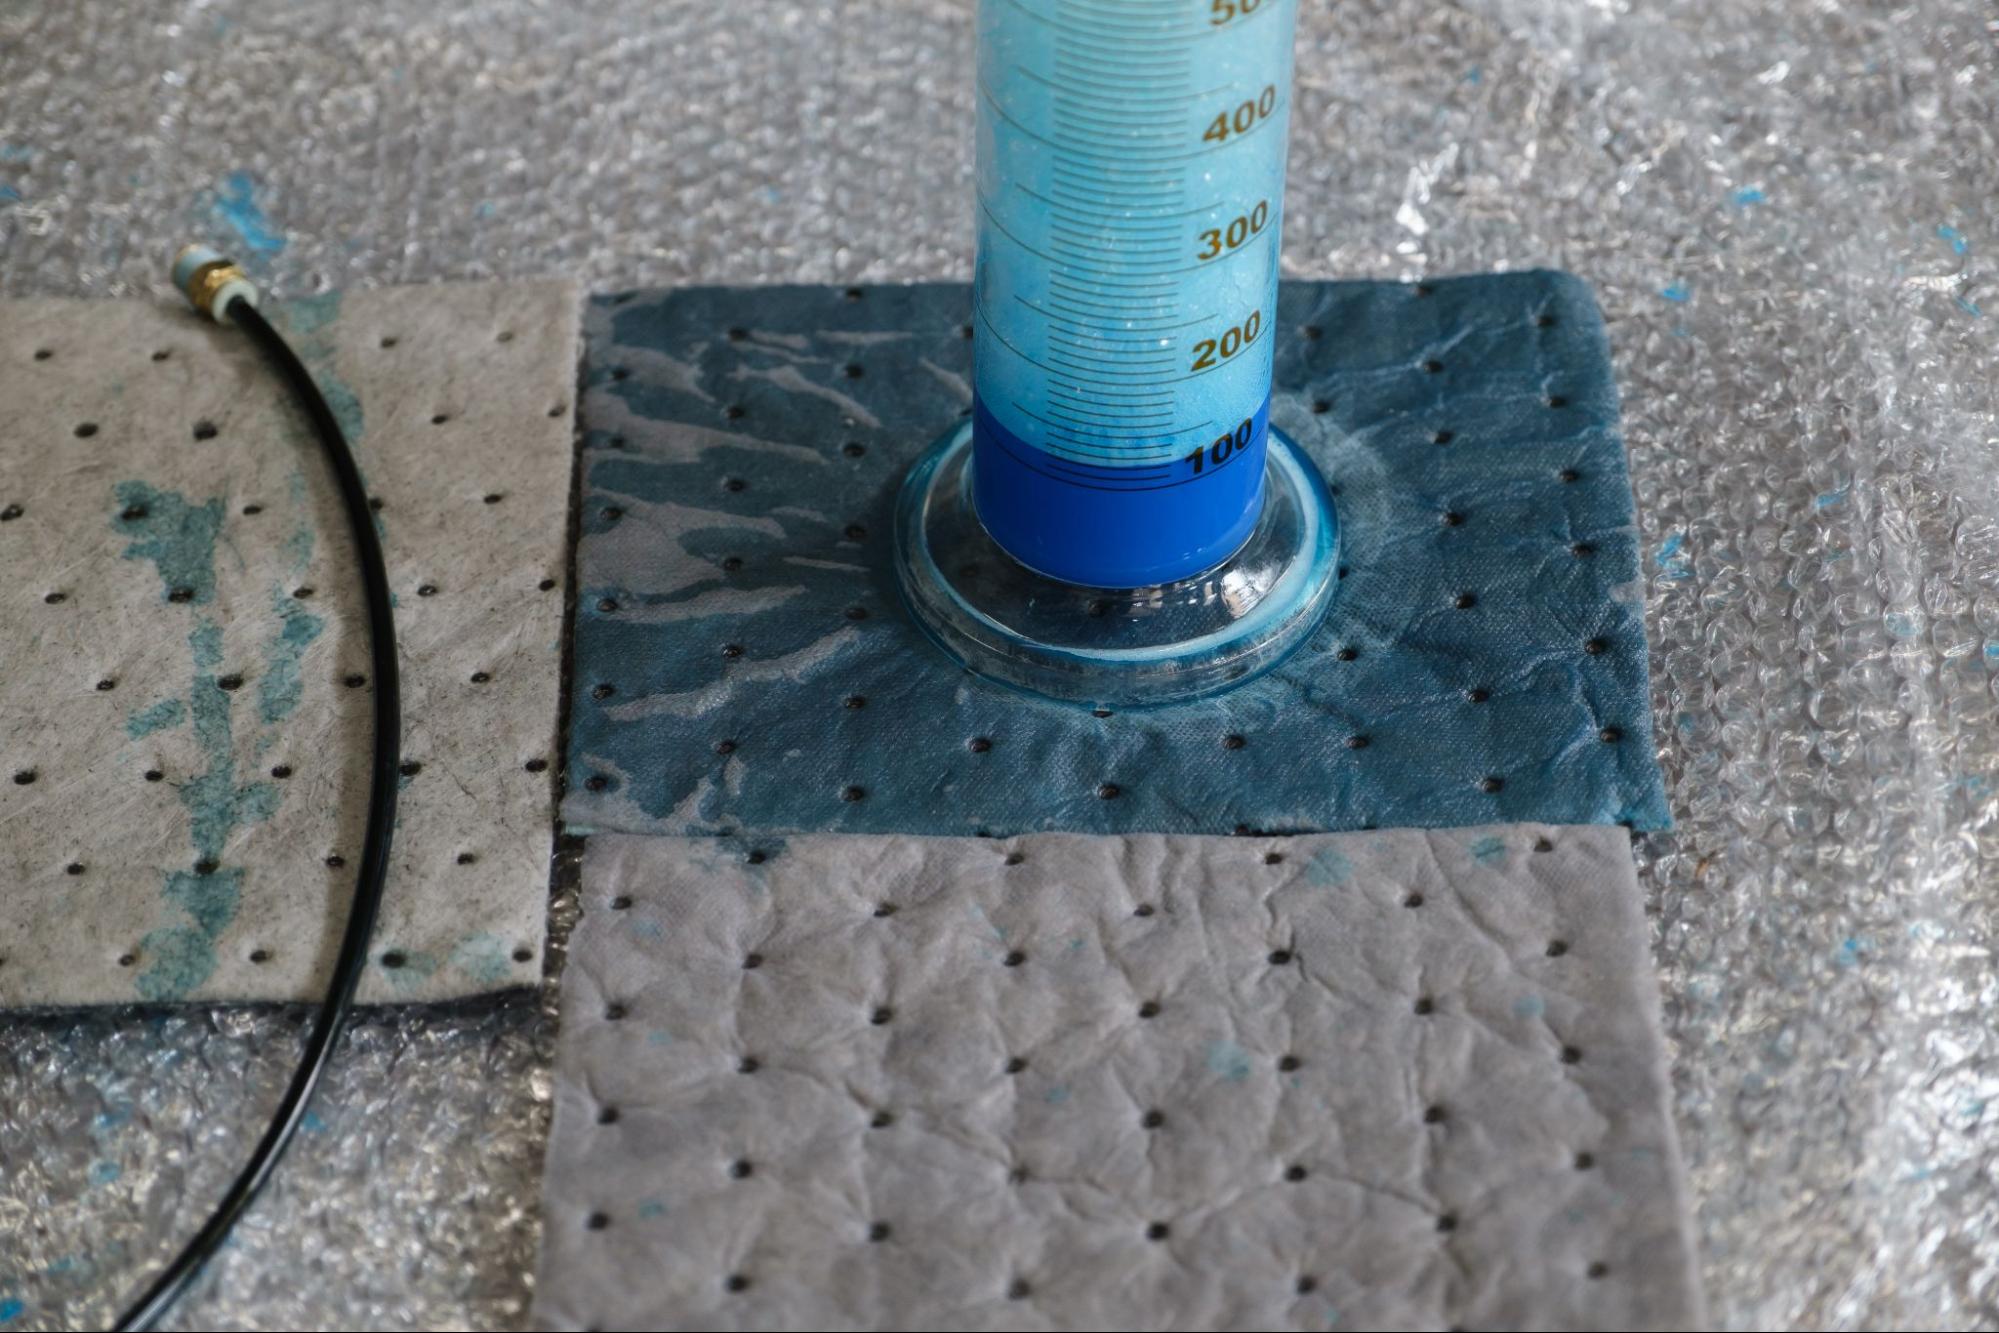 Oil Absorbent Action Mats are Absorbent Mats by American Floor Mats